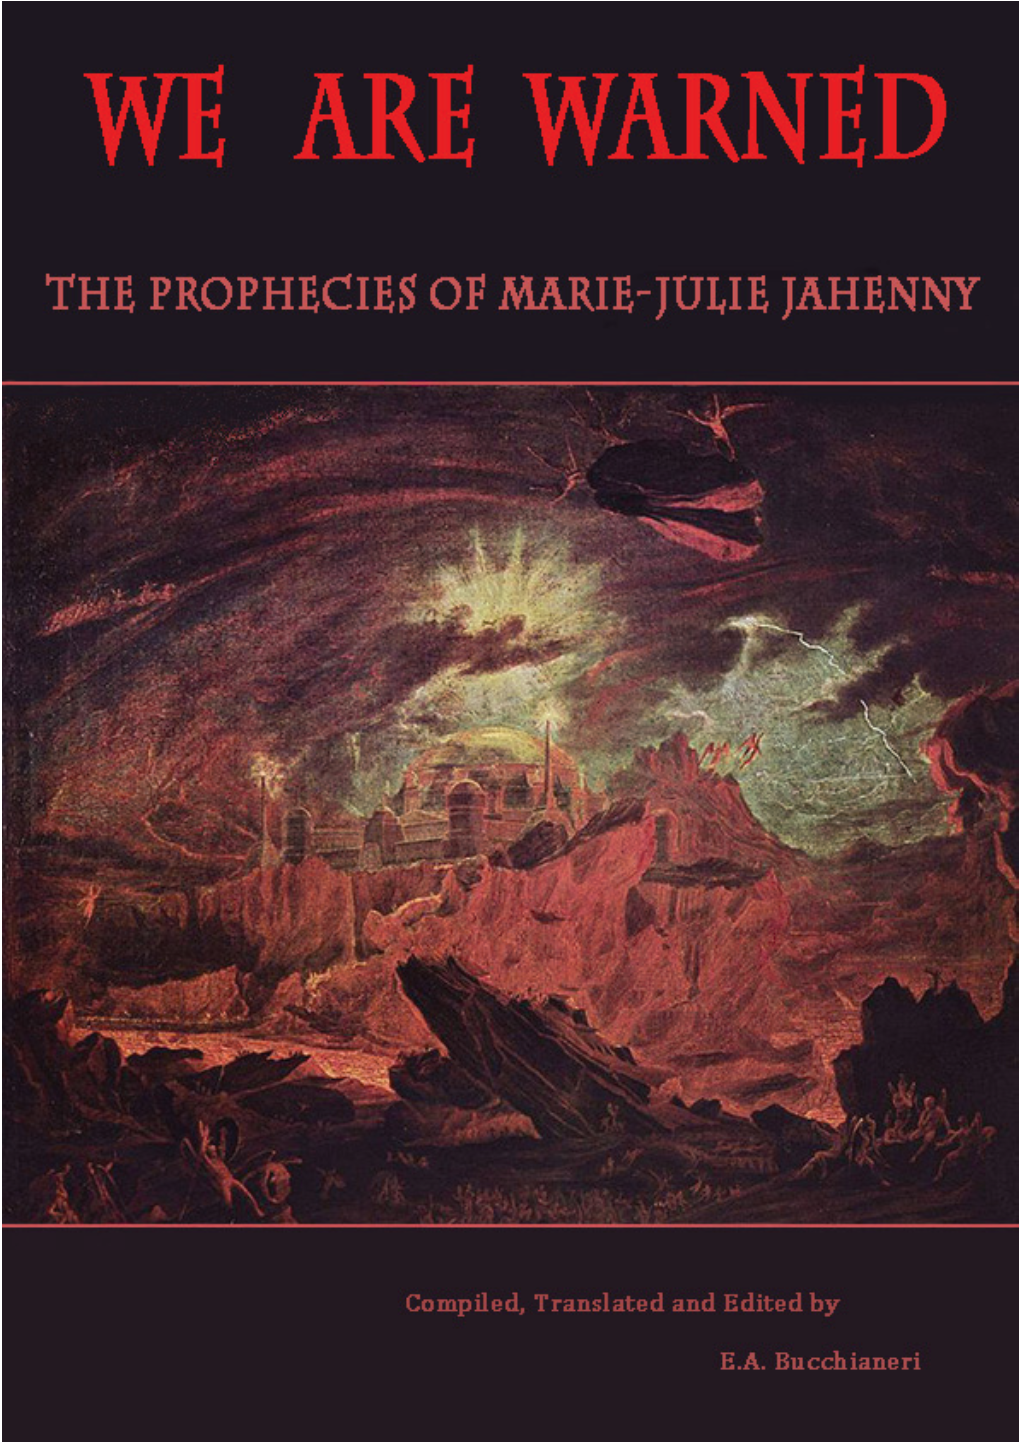 We Are Warned: the Prophecies of Marie-Julie Jahenny